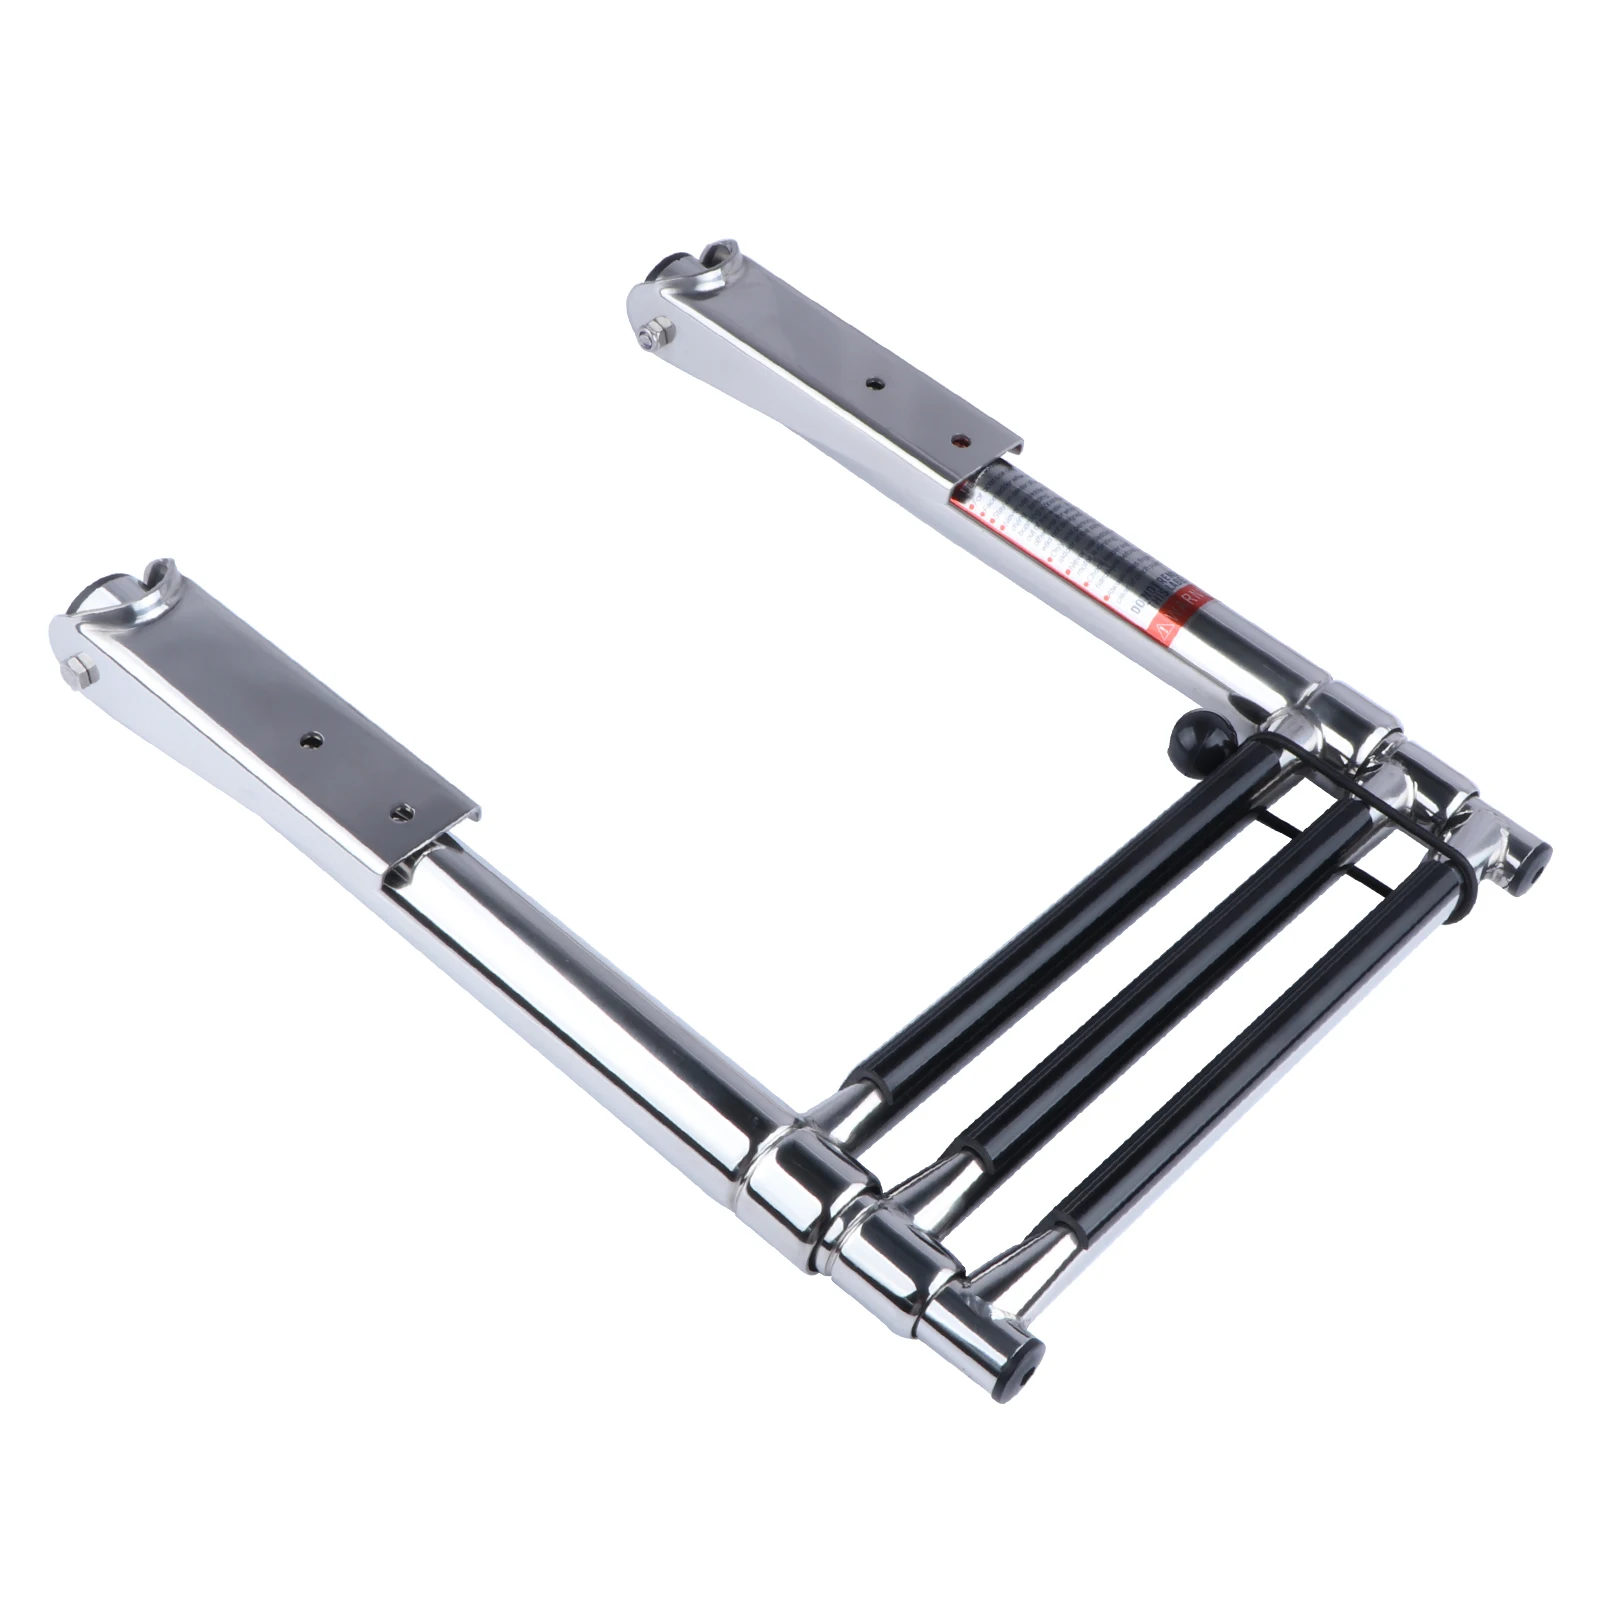 Boat Accessories 3 Step Stainless Steel Marine Boat ladder Yacht Polishe... - $101.67